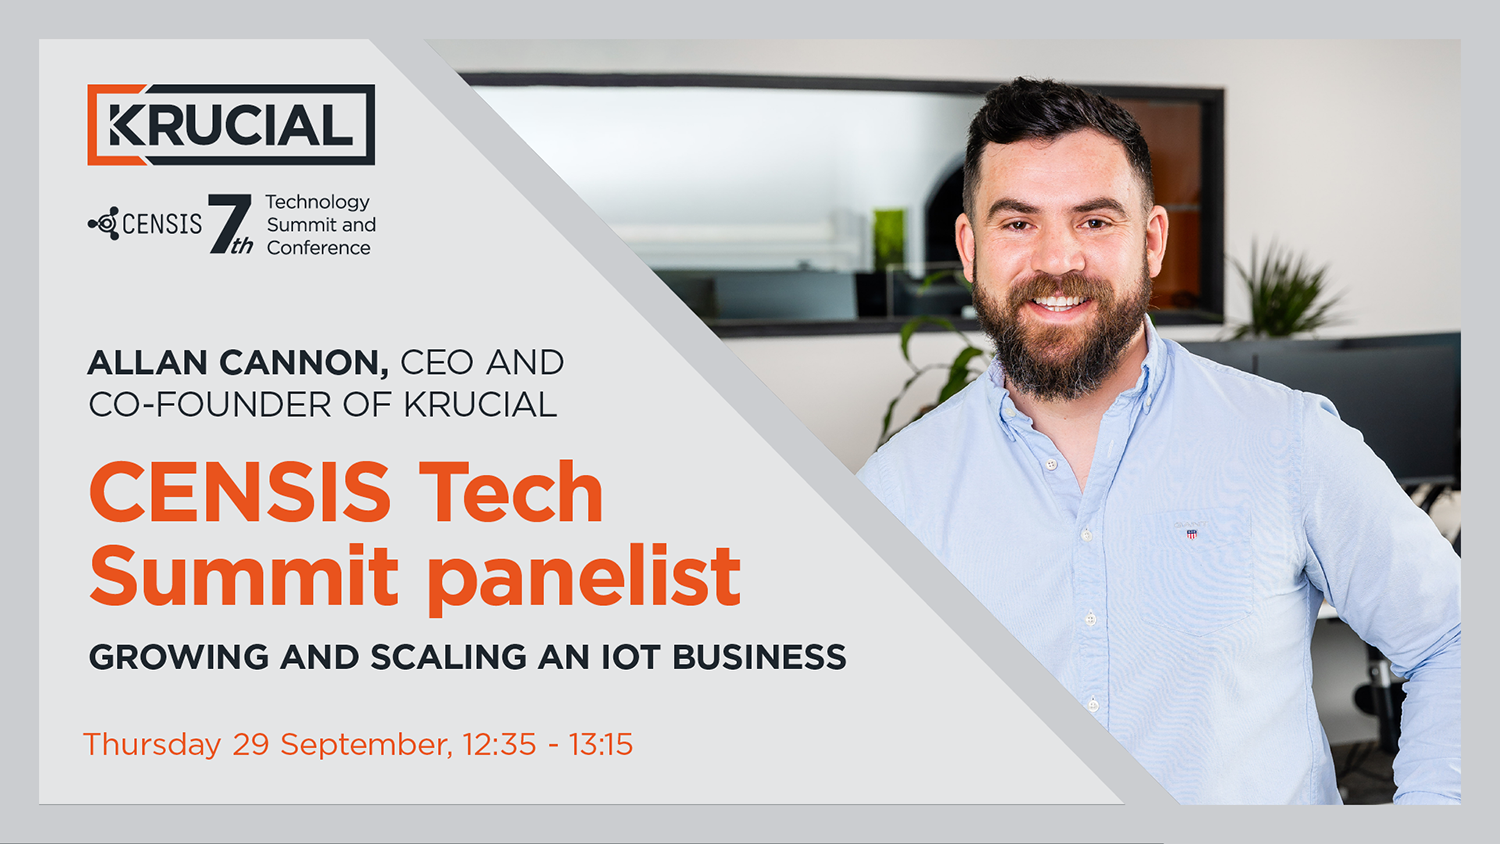 Krucial CEO to address CENSIS Tech Summit on scaling IoT business